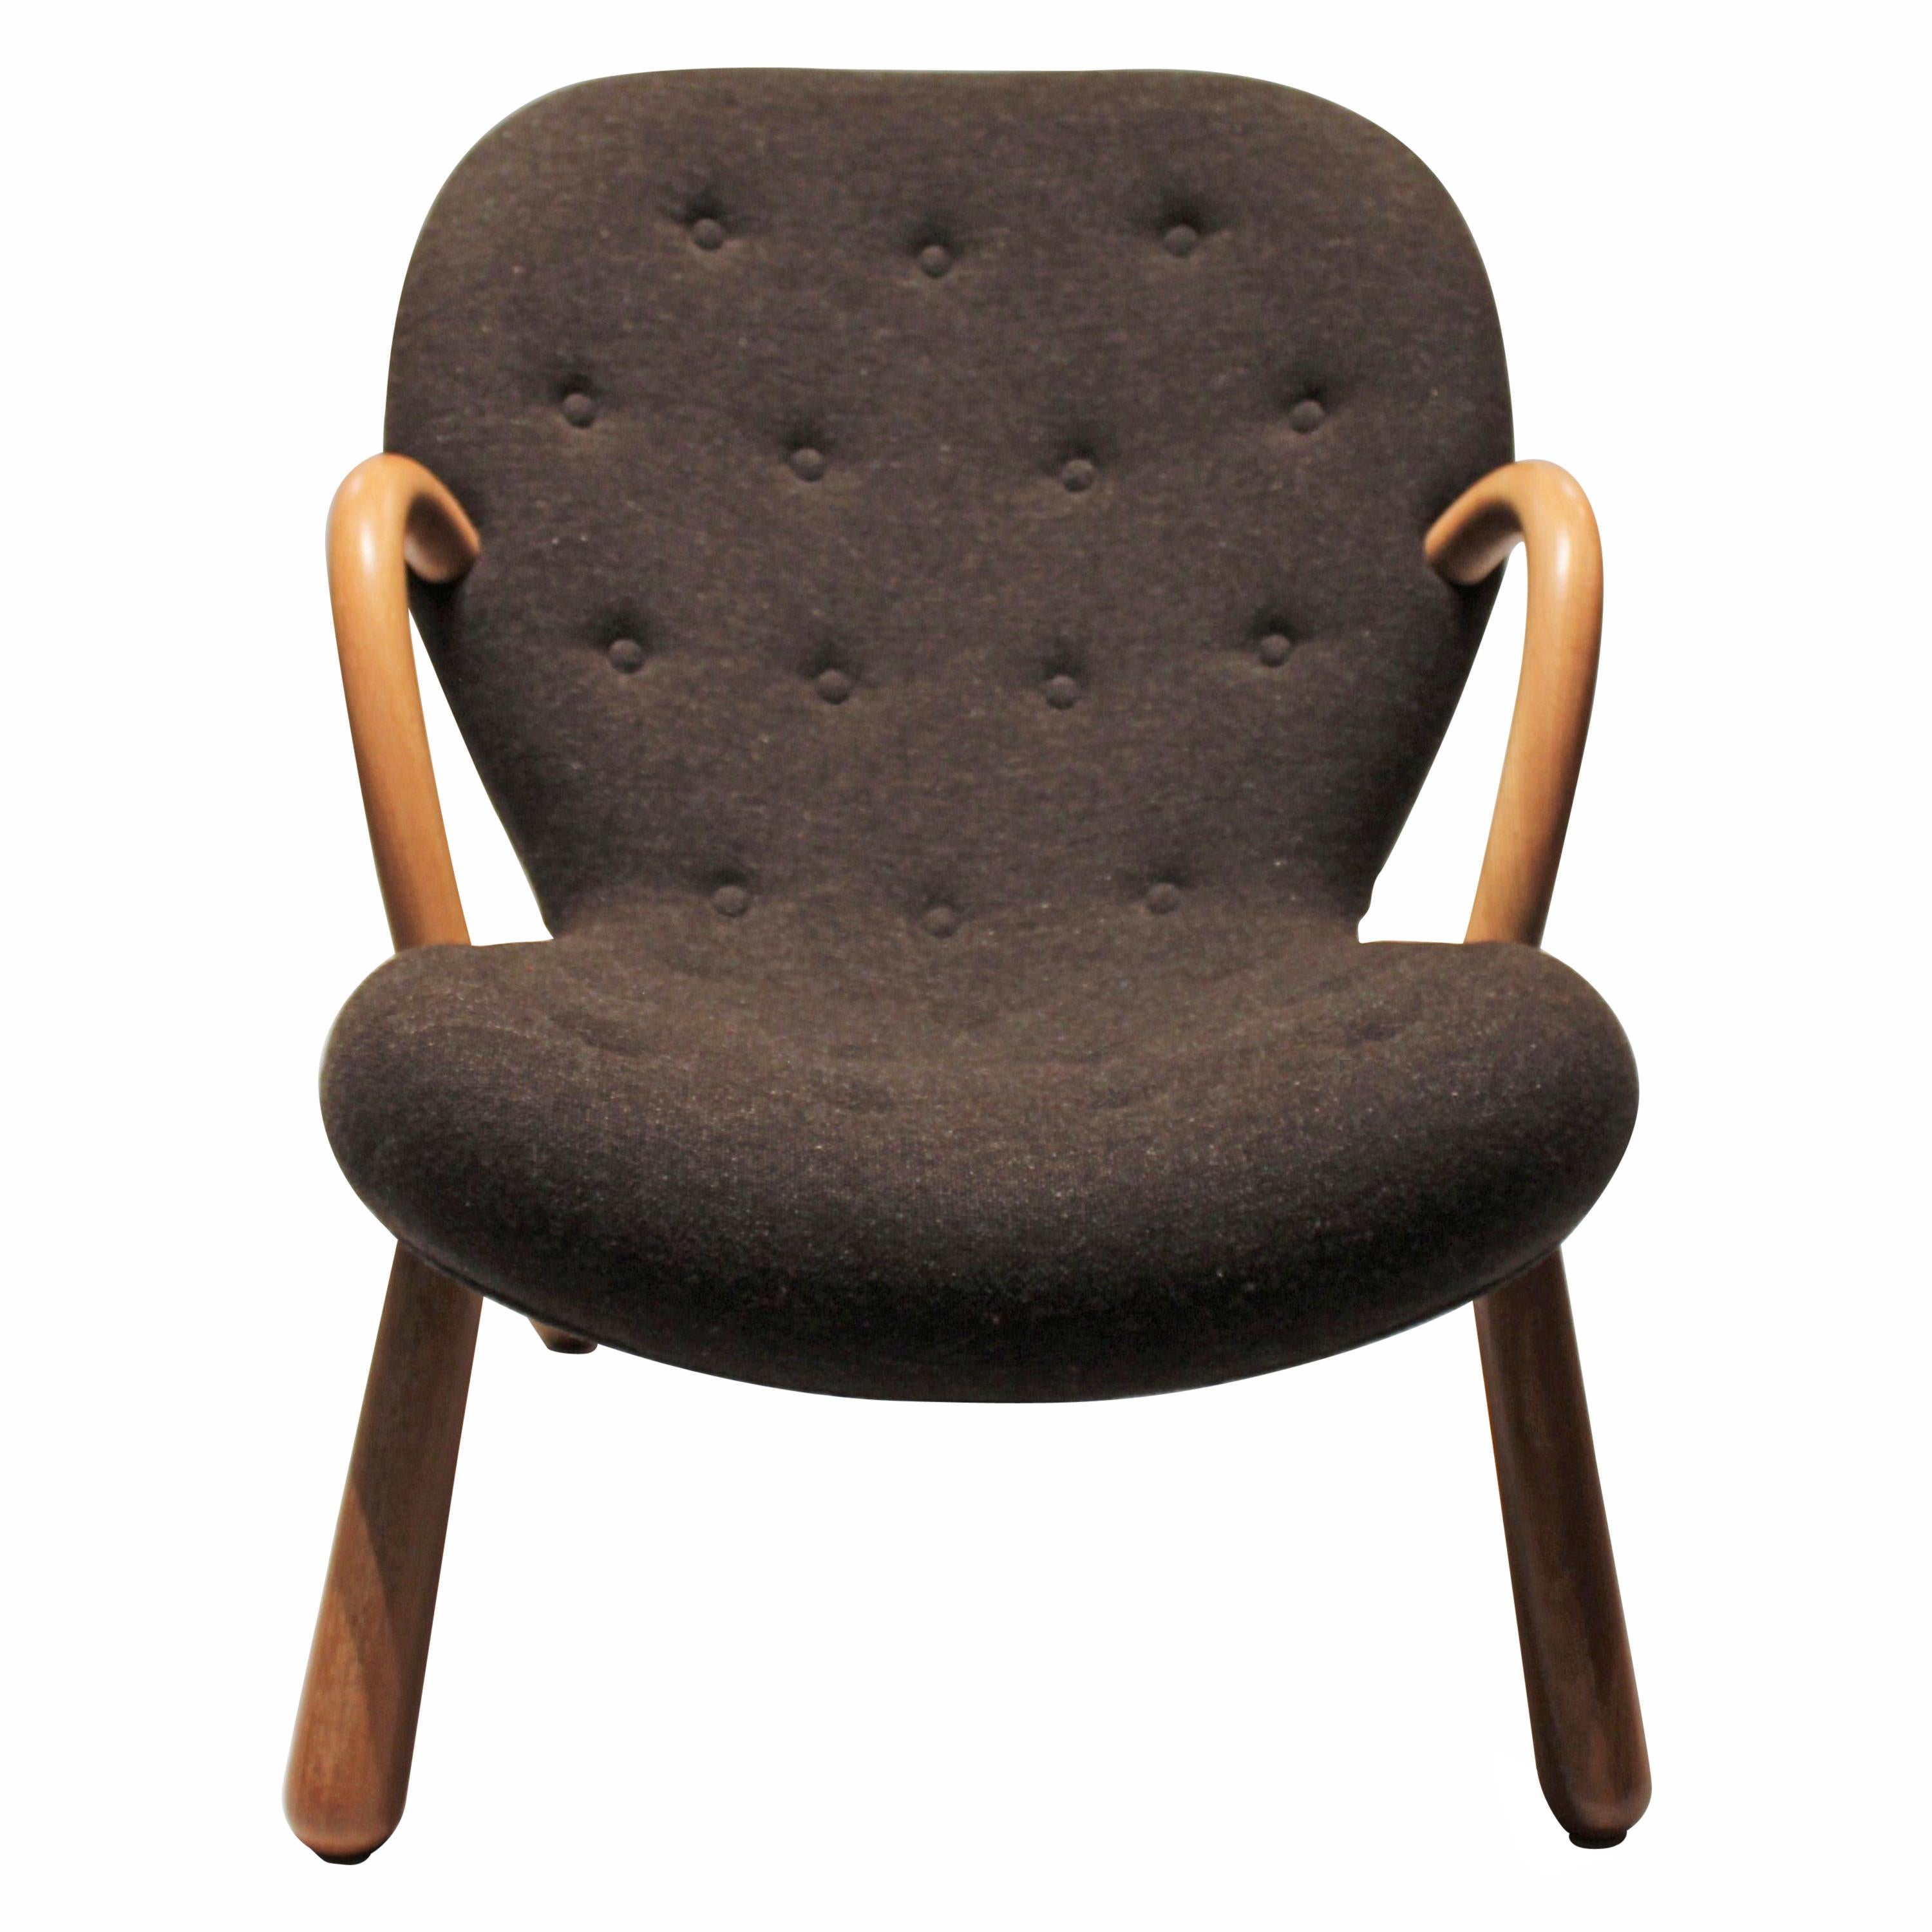 The Clam Chair Originally Designed by Phillip Arctander in 1944